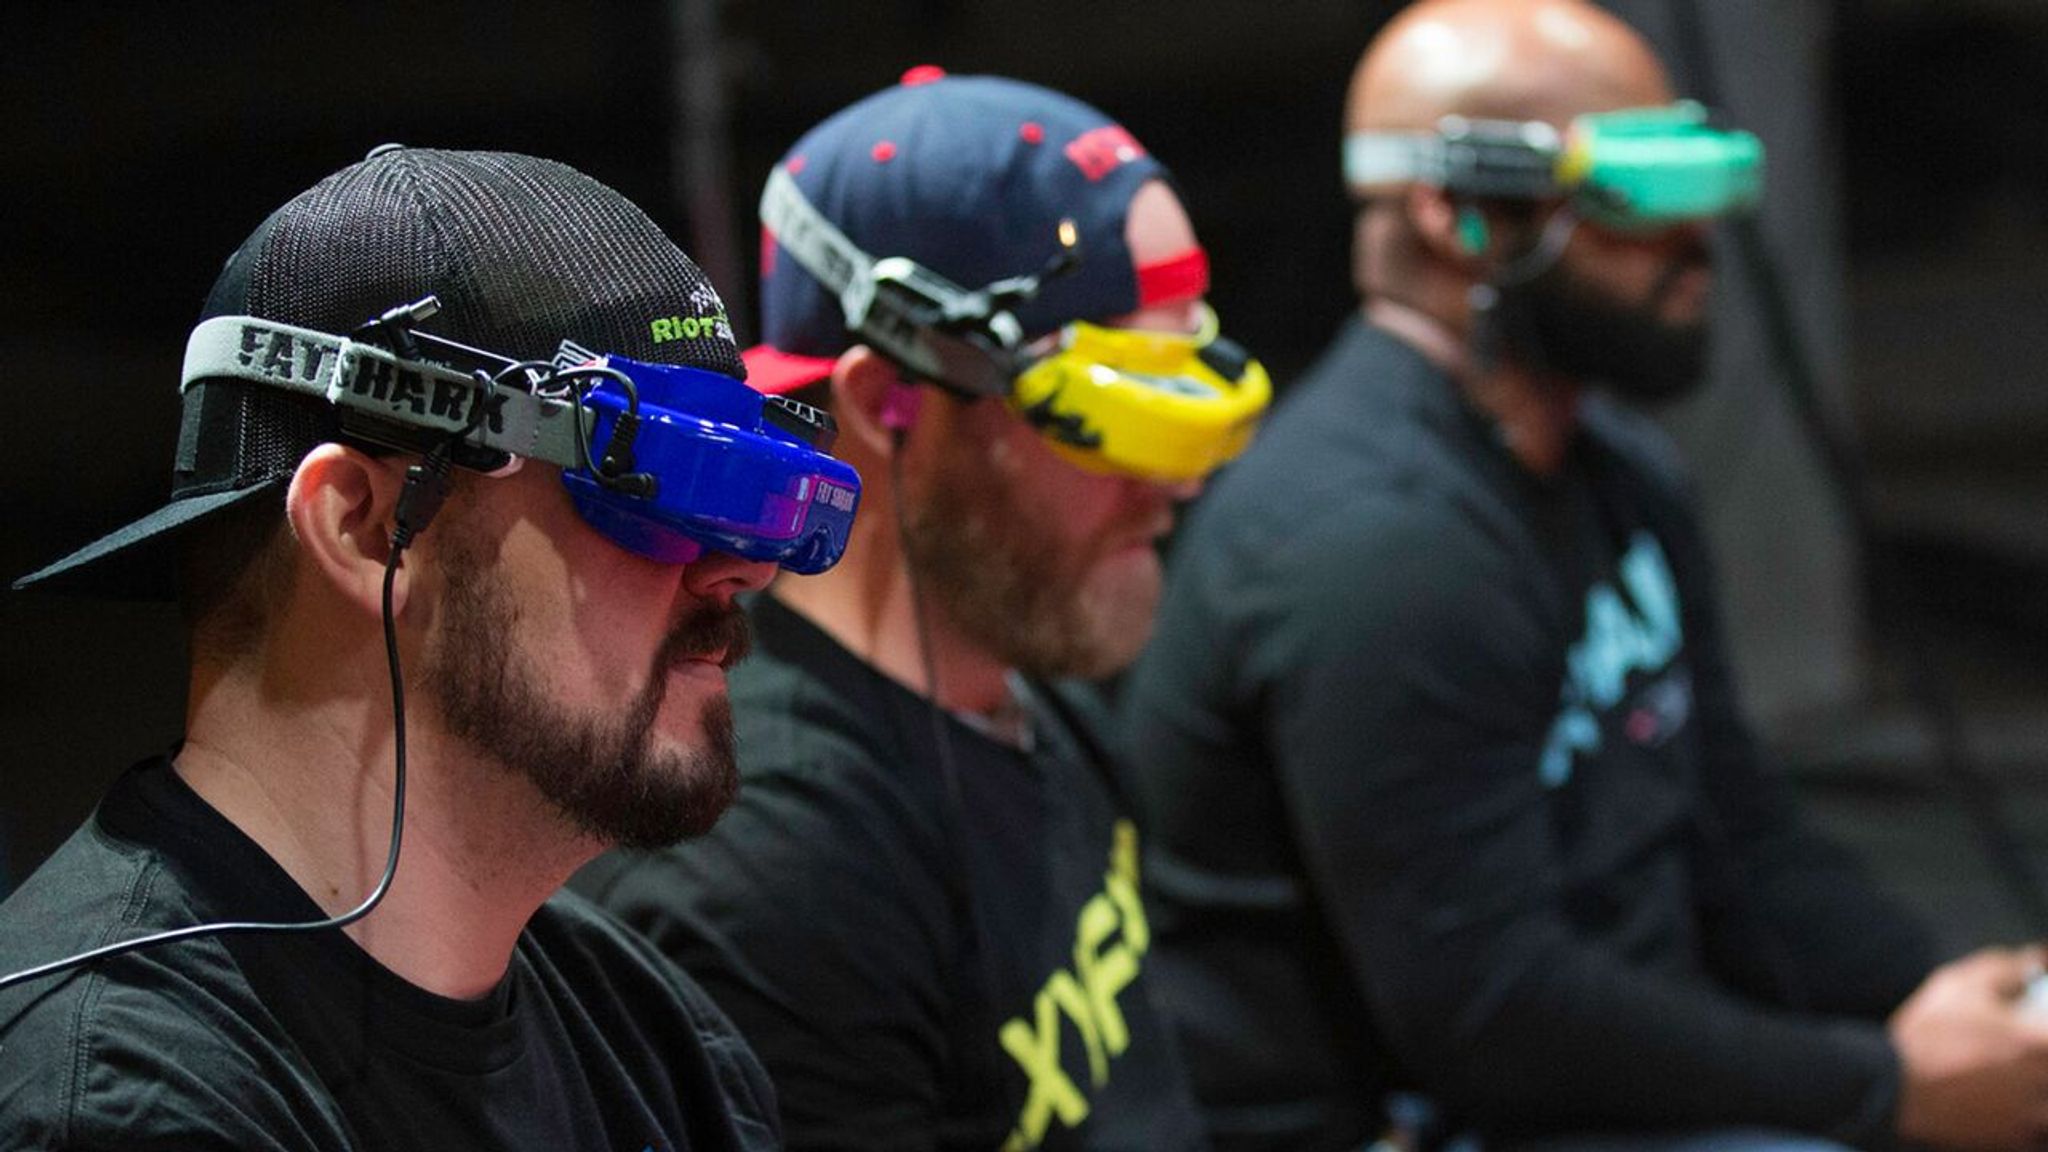 Sky to bring thrilling drone racing events to the UK and Ireland